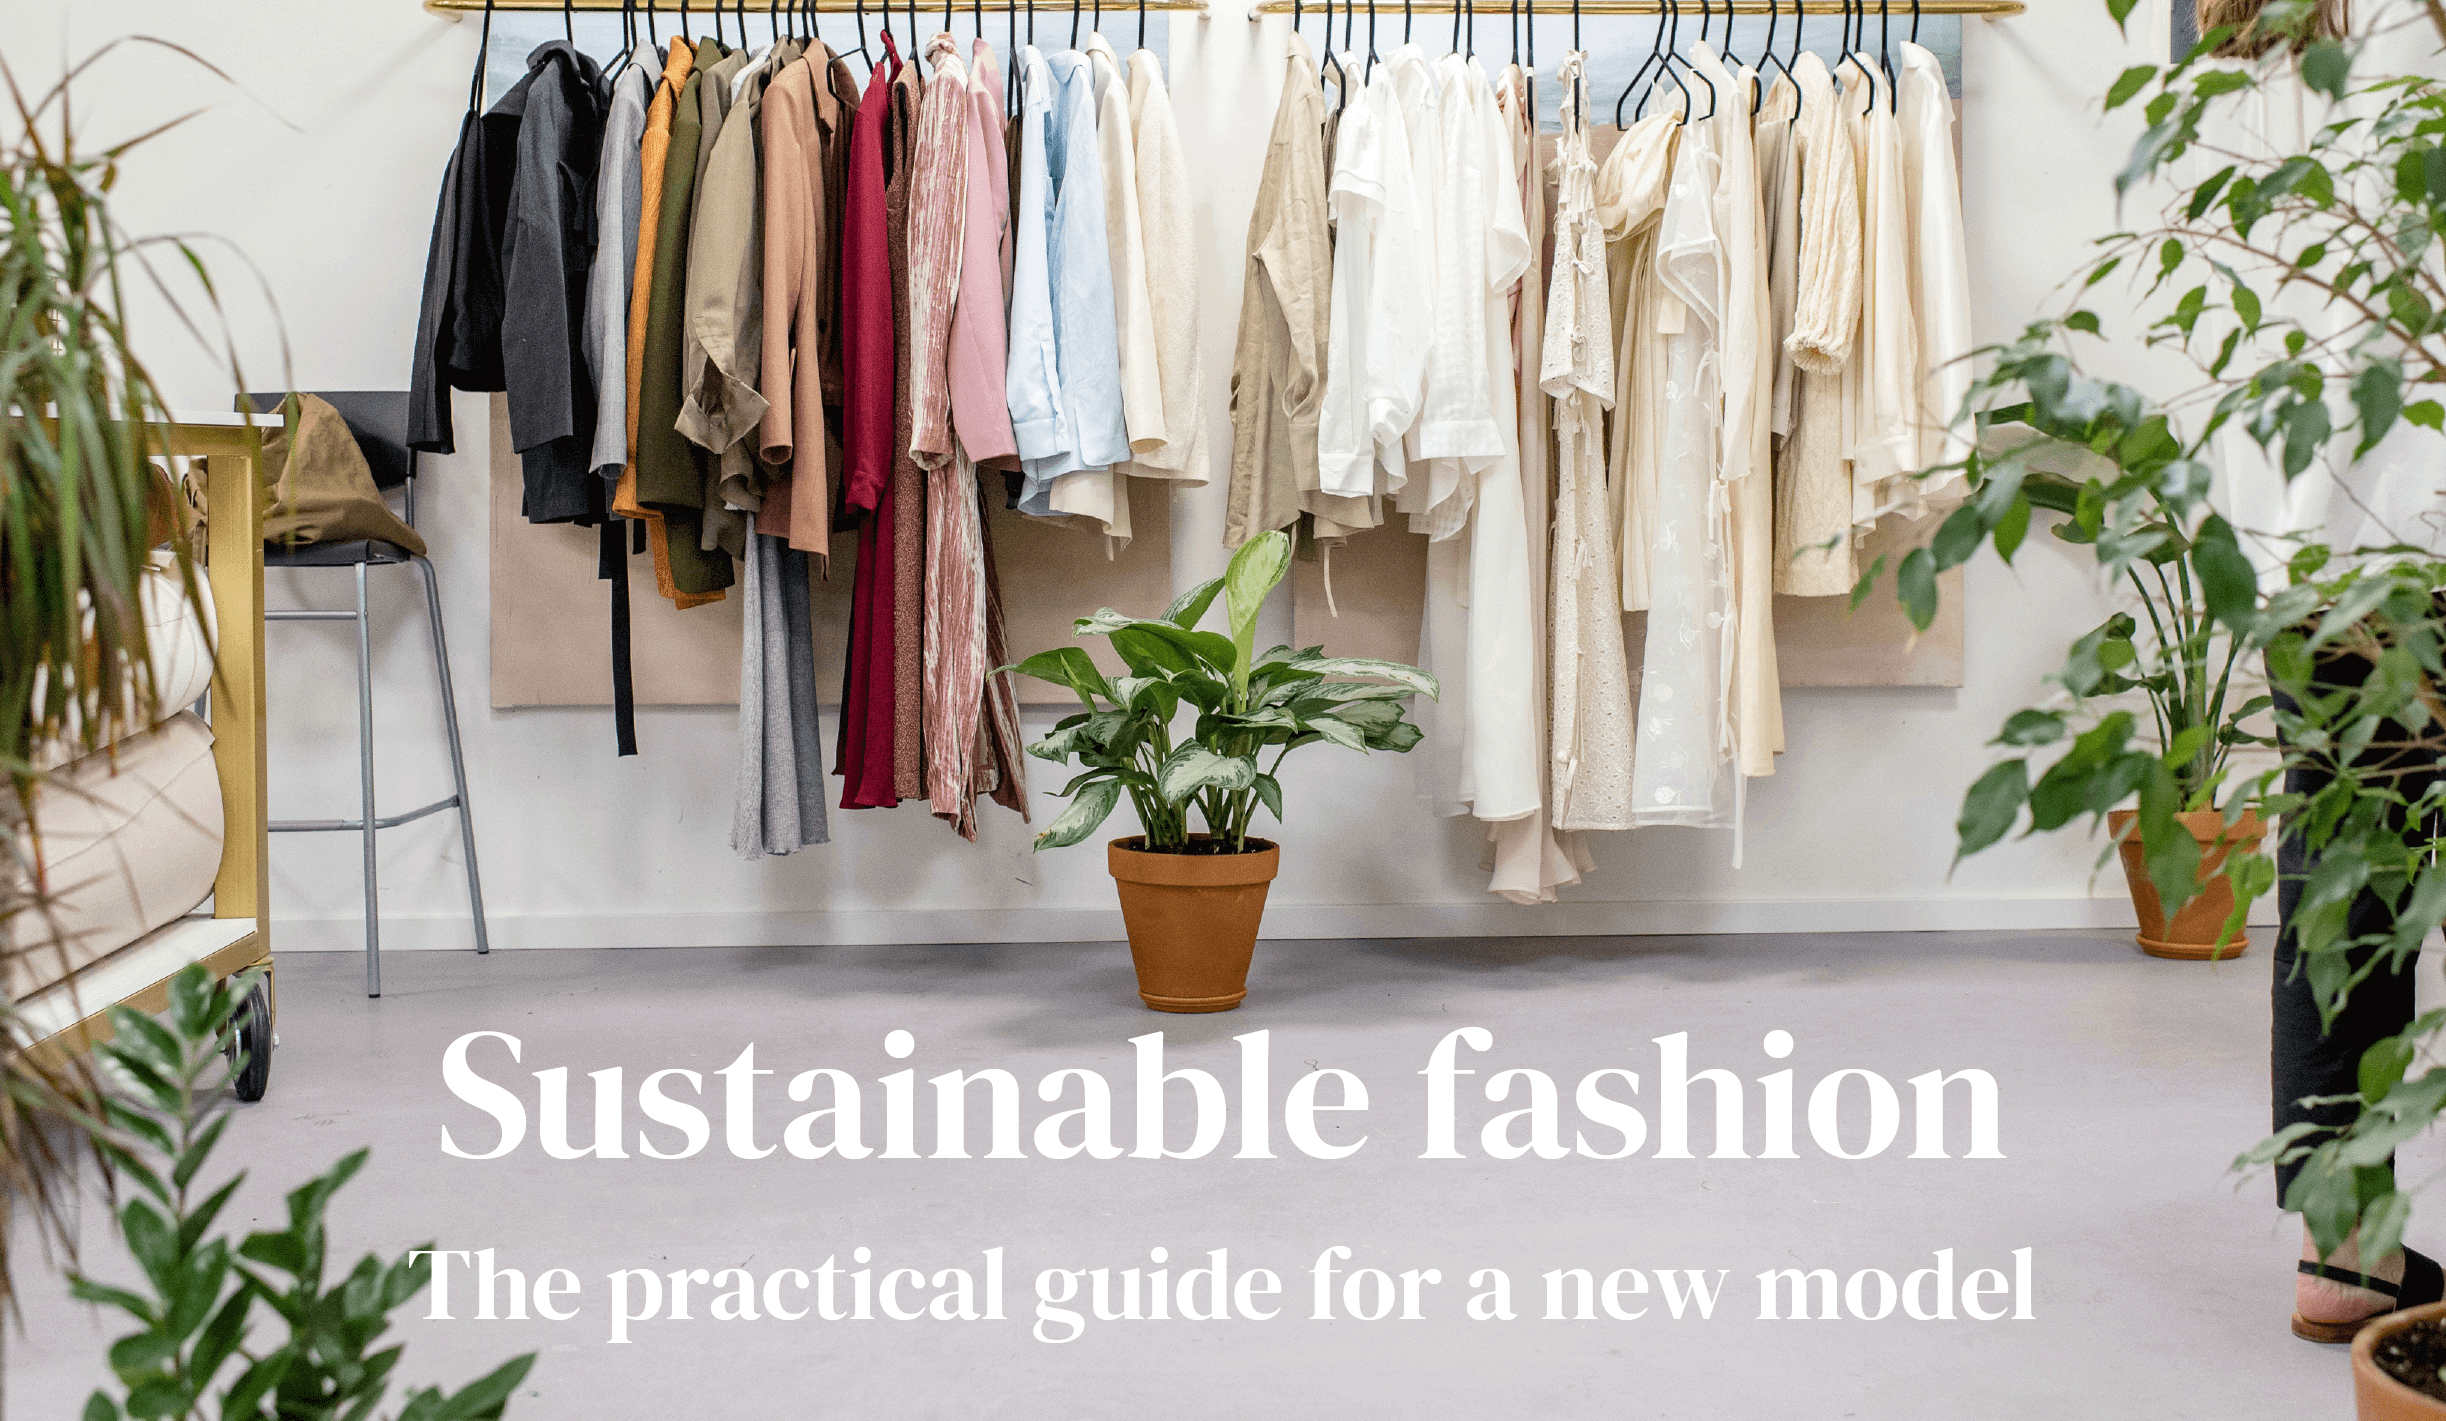 The future of sustainable fashion includes digital transformation                  in business